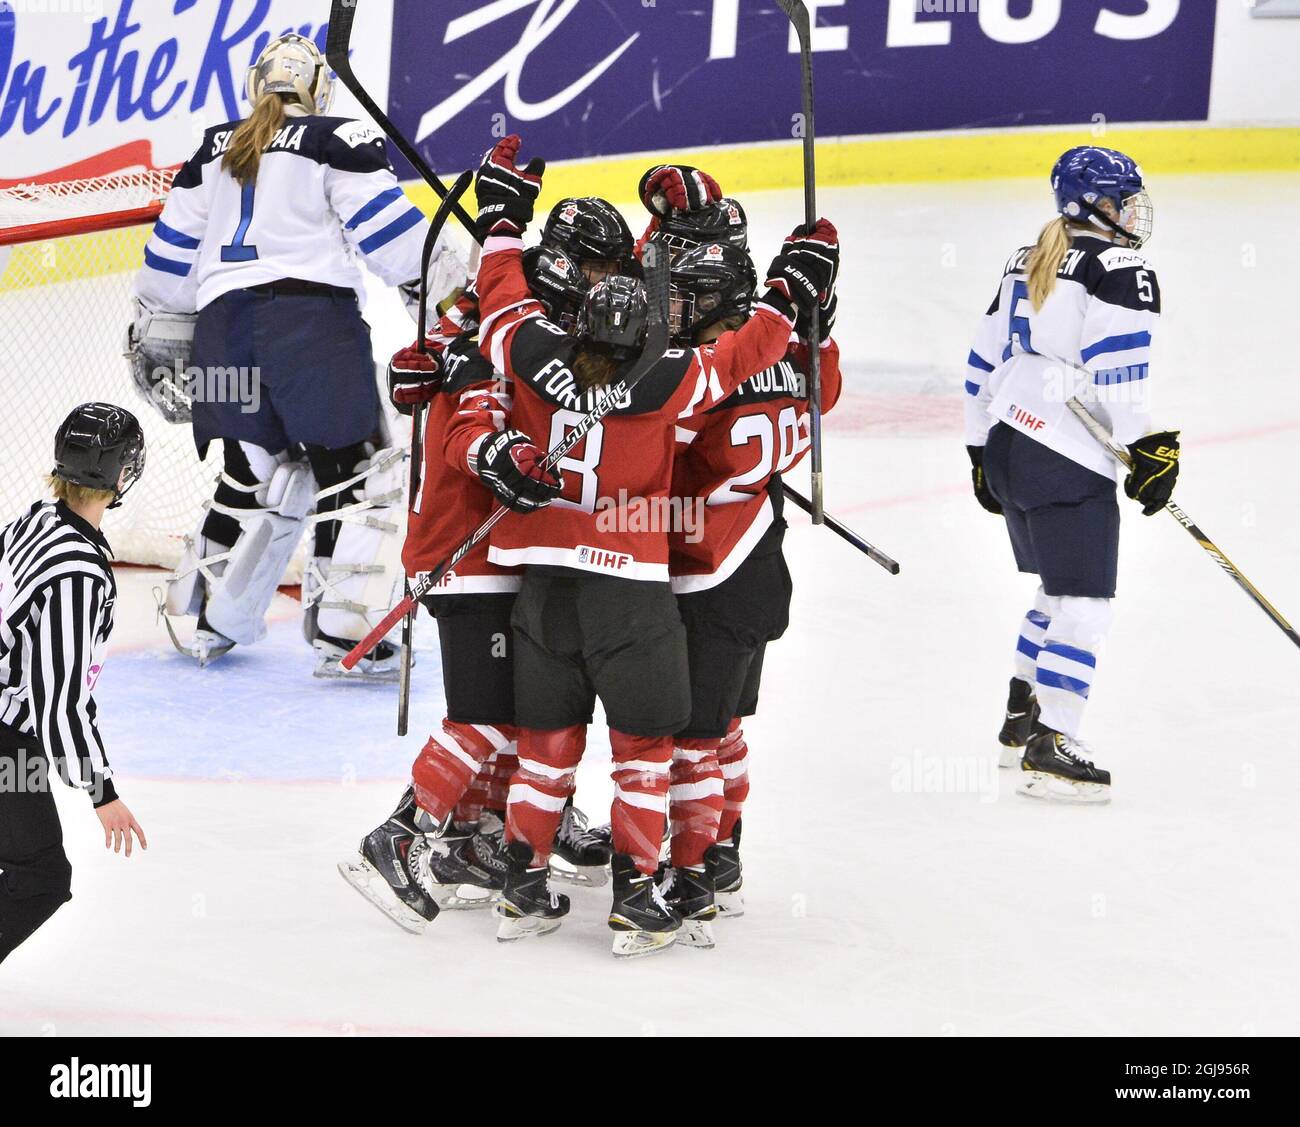 CORRECTION SPELLING AV SCORERS NAME Canadian players celebrate after Brigette Lacquette (4, hidden) scored the opening goal, as Finlands goalkeeper Eveliina Suonpaa (1) and Anna Kilponen (5) looks away during the 2015 IIHF Ice Hockey Women's World Championship group A match between Canada and Finland at Malmo Isstadion in Malmo, southern Sweden, on March 31, 2015. Photo: Claudio Bresciani / TT / code 10090 Stock Photo